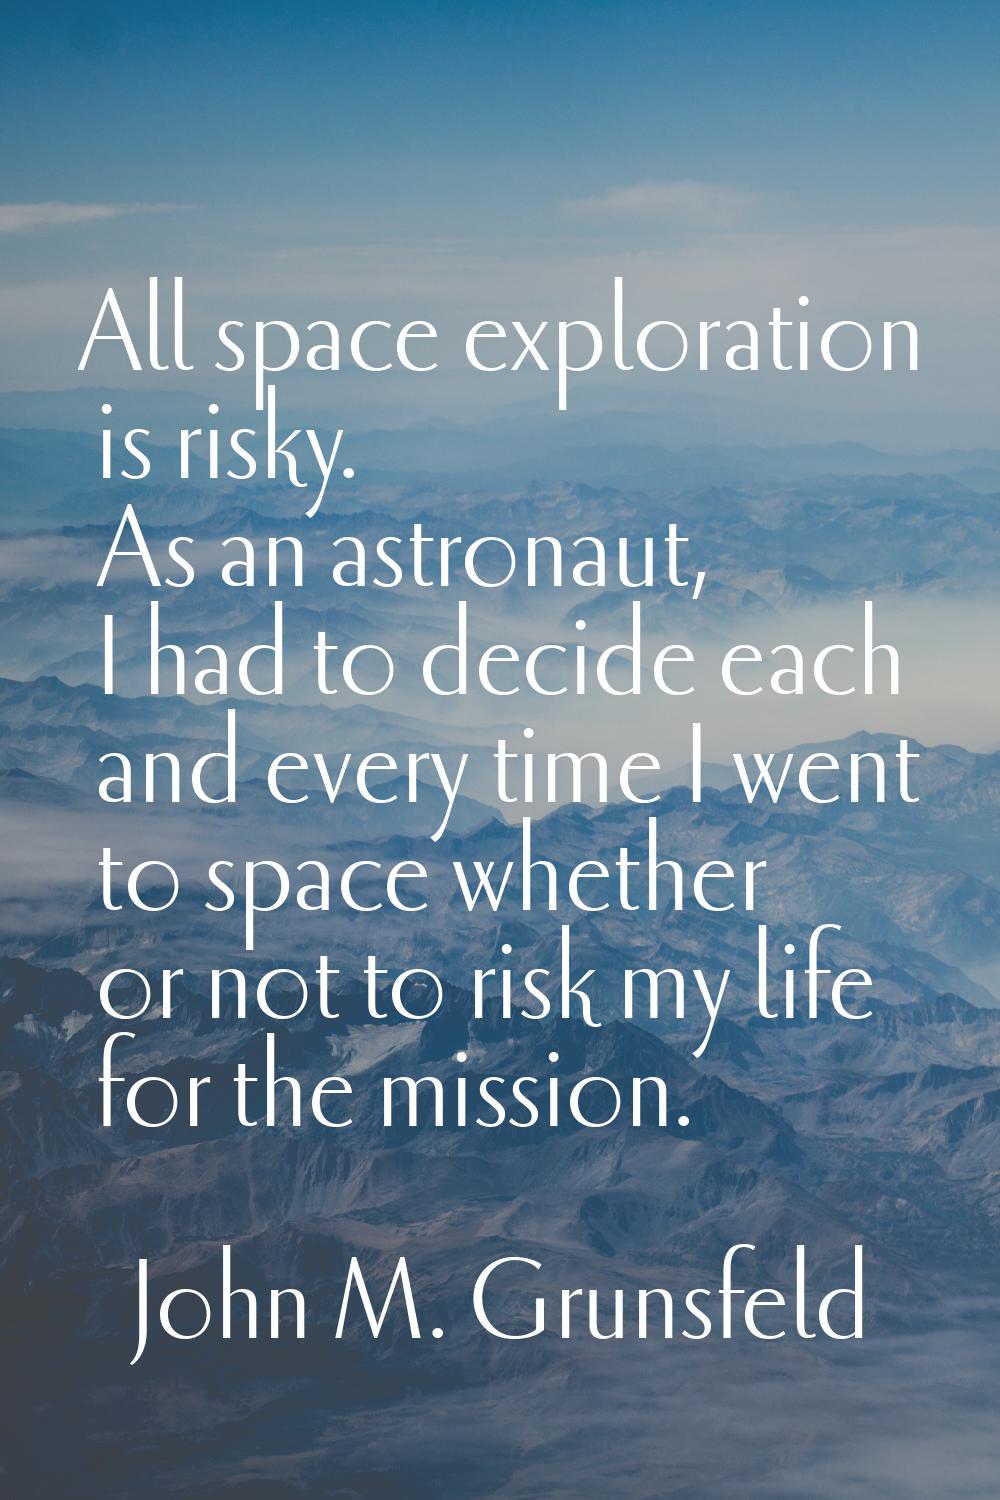 All space exploration is risky. As an astronaut, I had to decide each and every time I went to spac